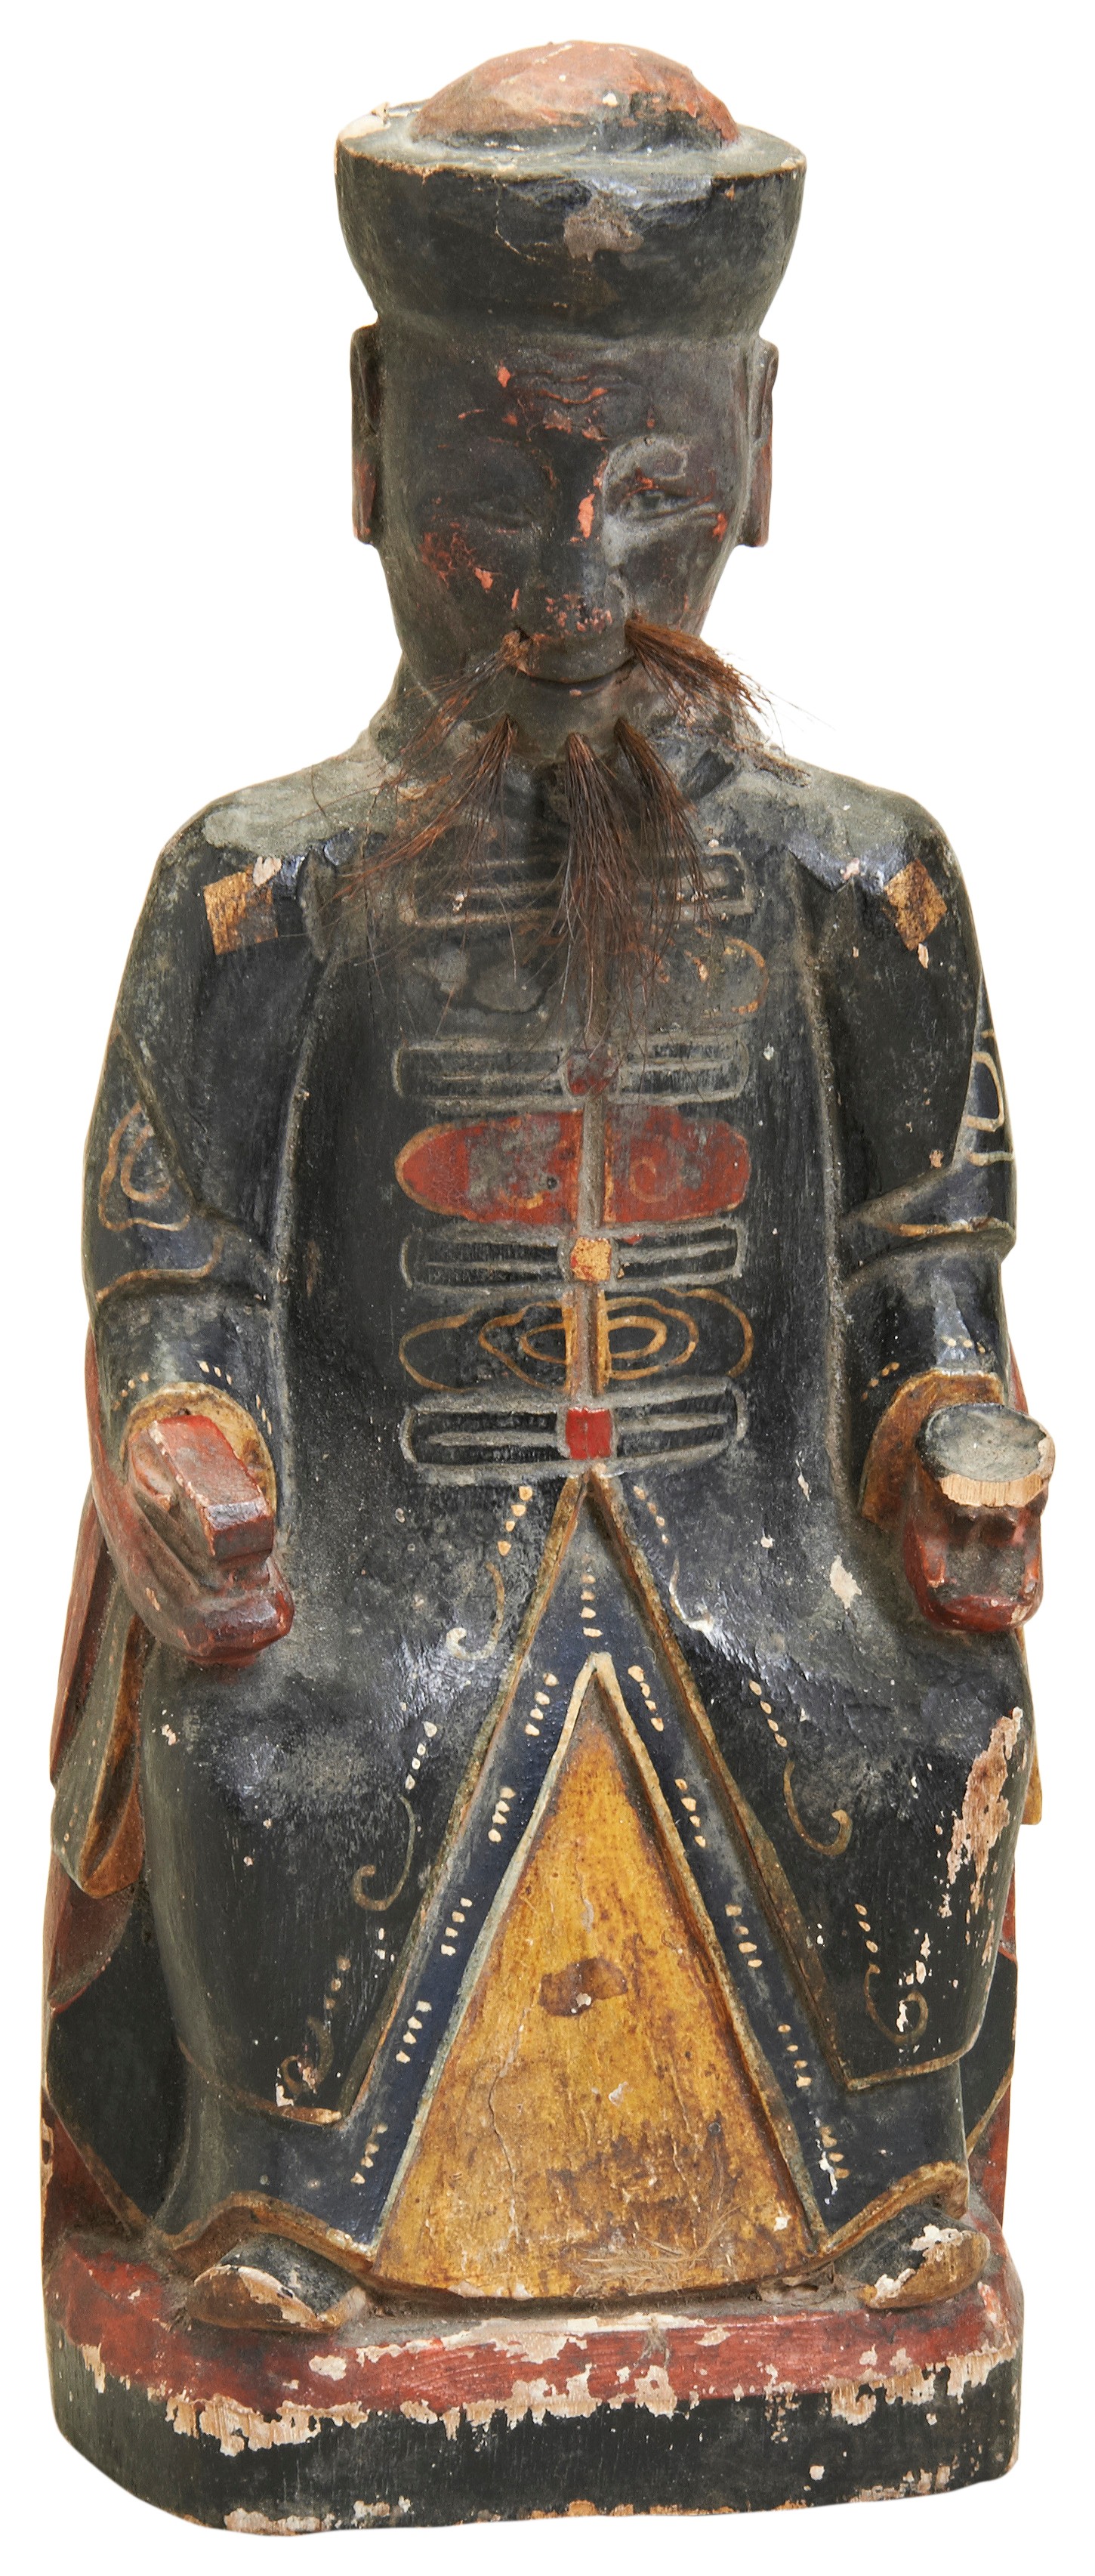 A CARVED LACQUERED WOOD FIGURE 19TH CENTURY a wooden figure probably a local god from the Southern